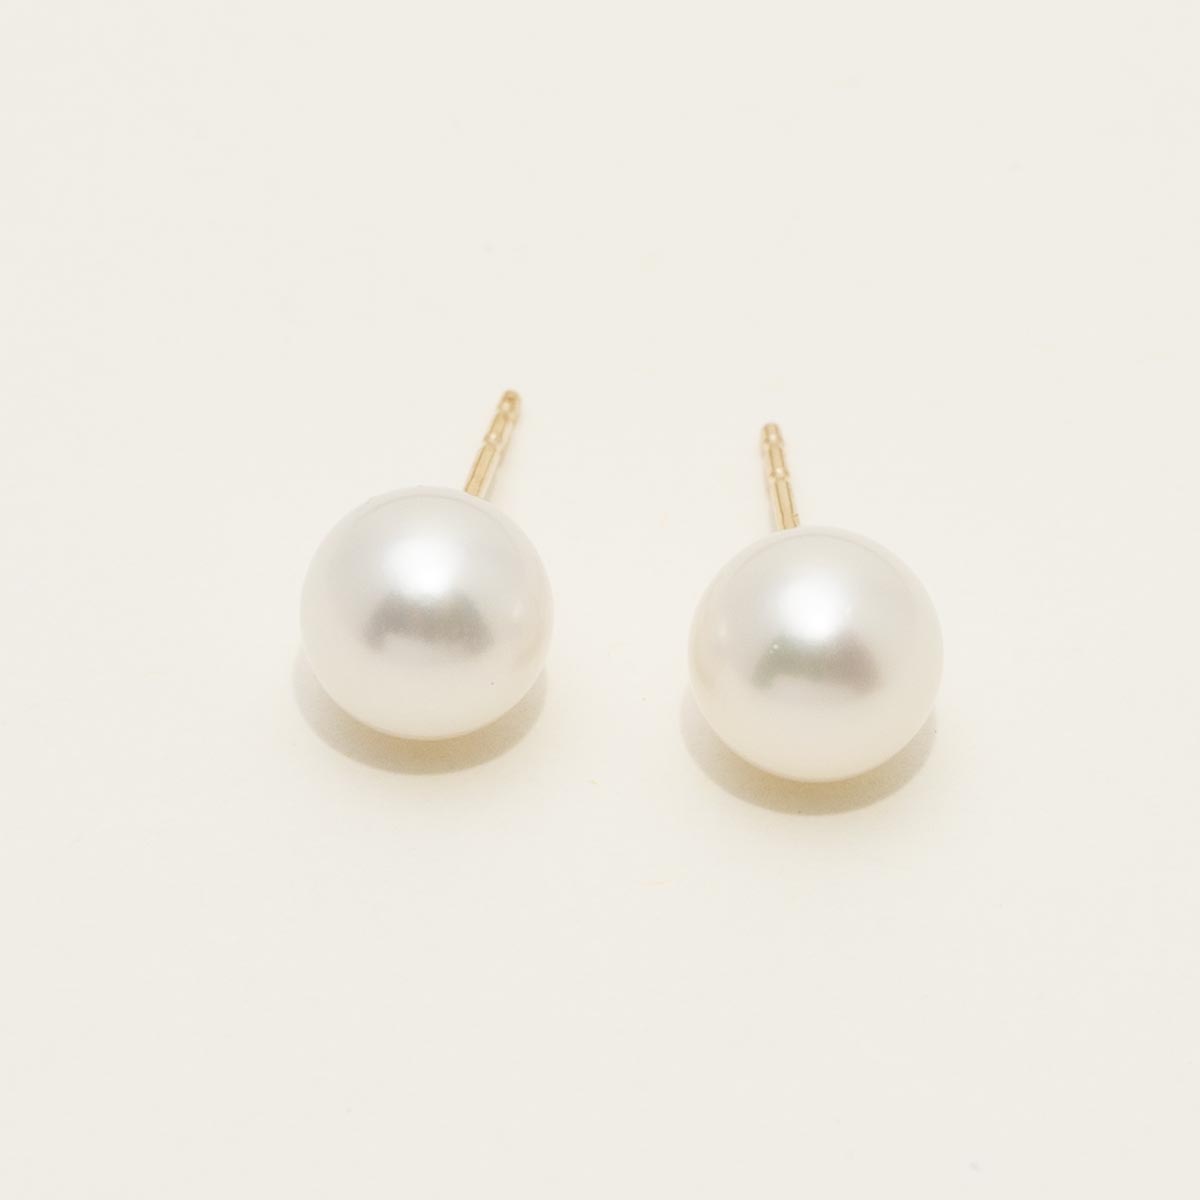 Mastoloni Cultured Freshwater Pearl Stud Earrings in 14kt Yellow Gold (7-7.5mm pearls)